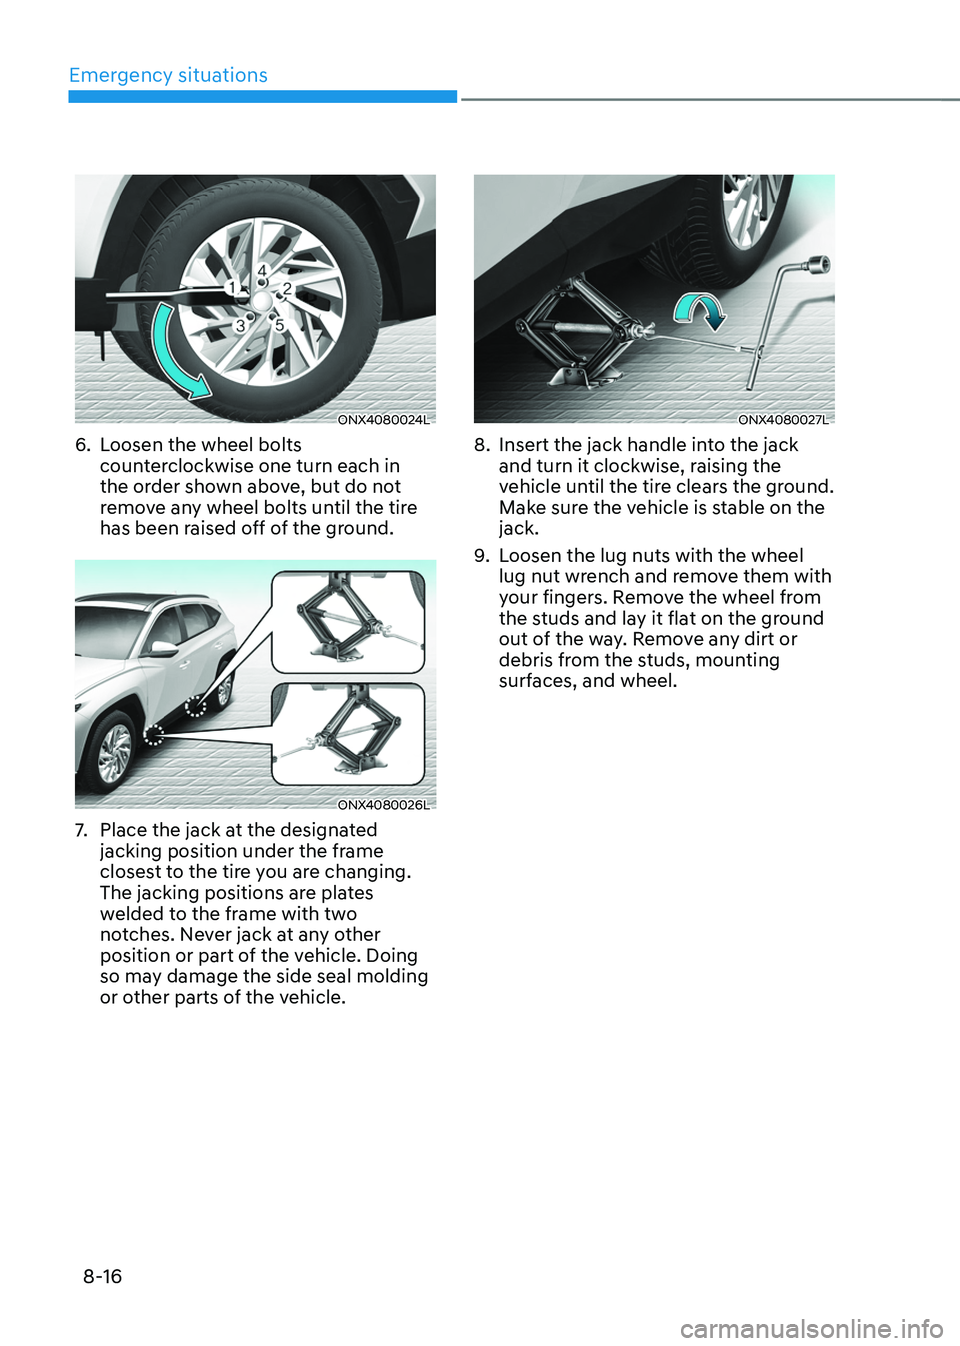 HYUNDAI TUCSON 2022  Owners Manual Emergency situations
8-16
ONX4080024L
6. Loosen the wheel bolts 
counterclockwise one turn each in 
the order shown above, but do not 
remove any wheel bolts until the tire 
has been raised off of the